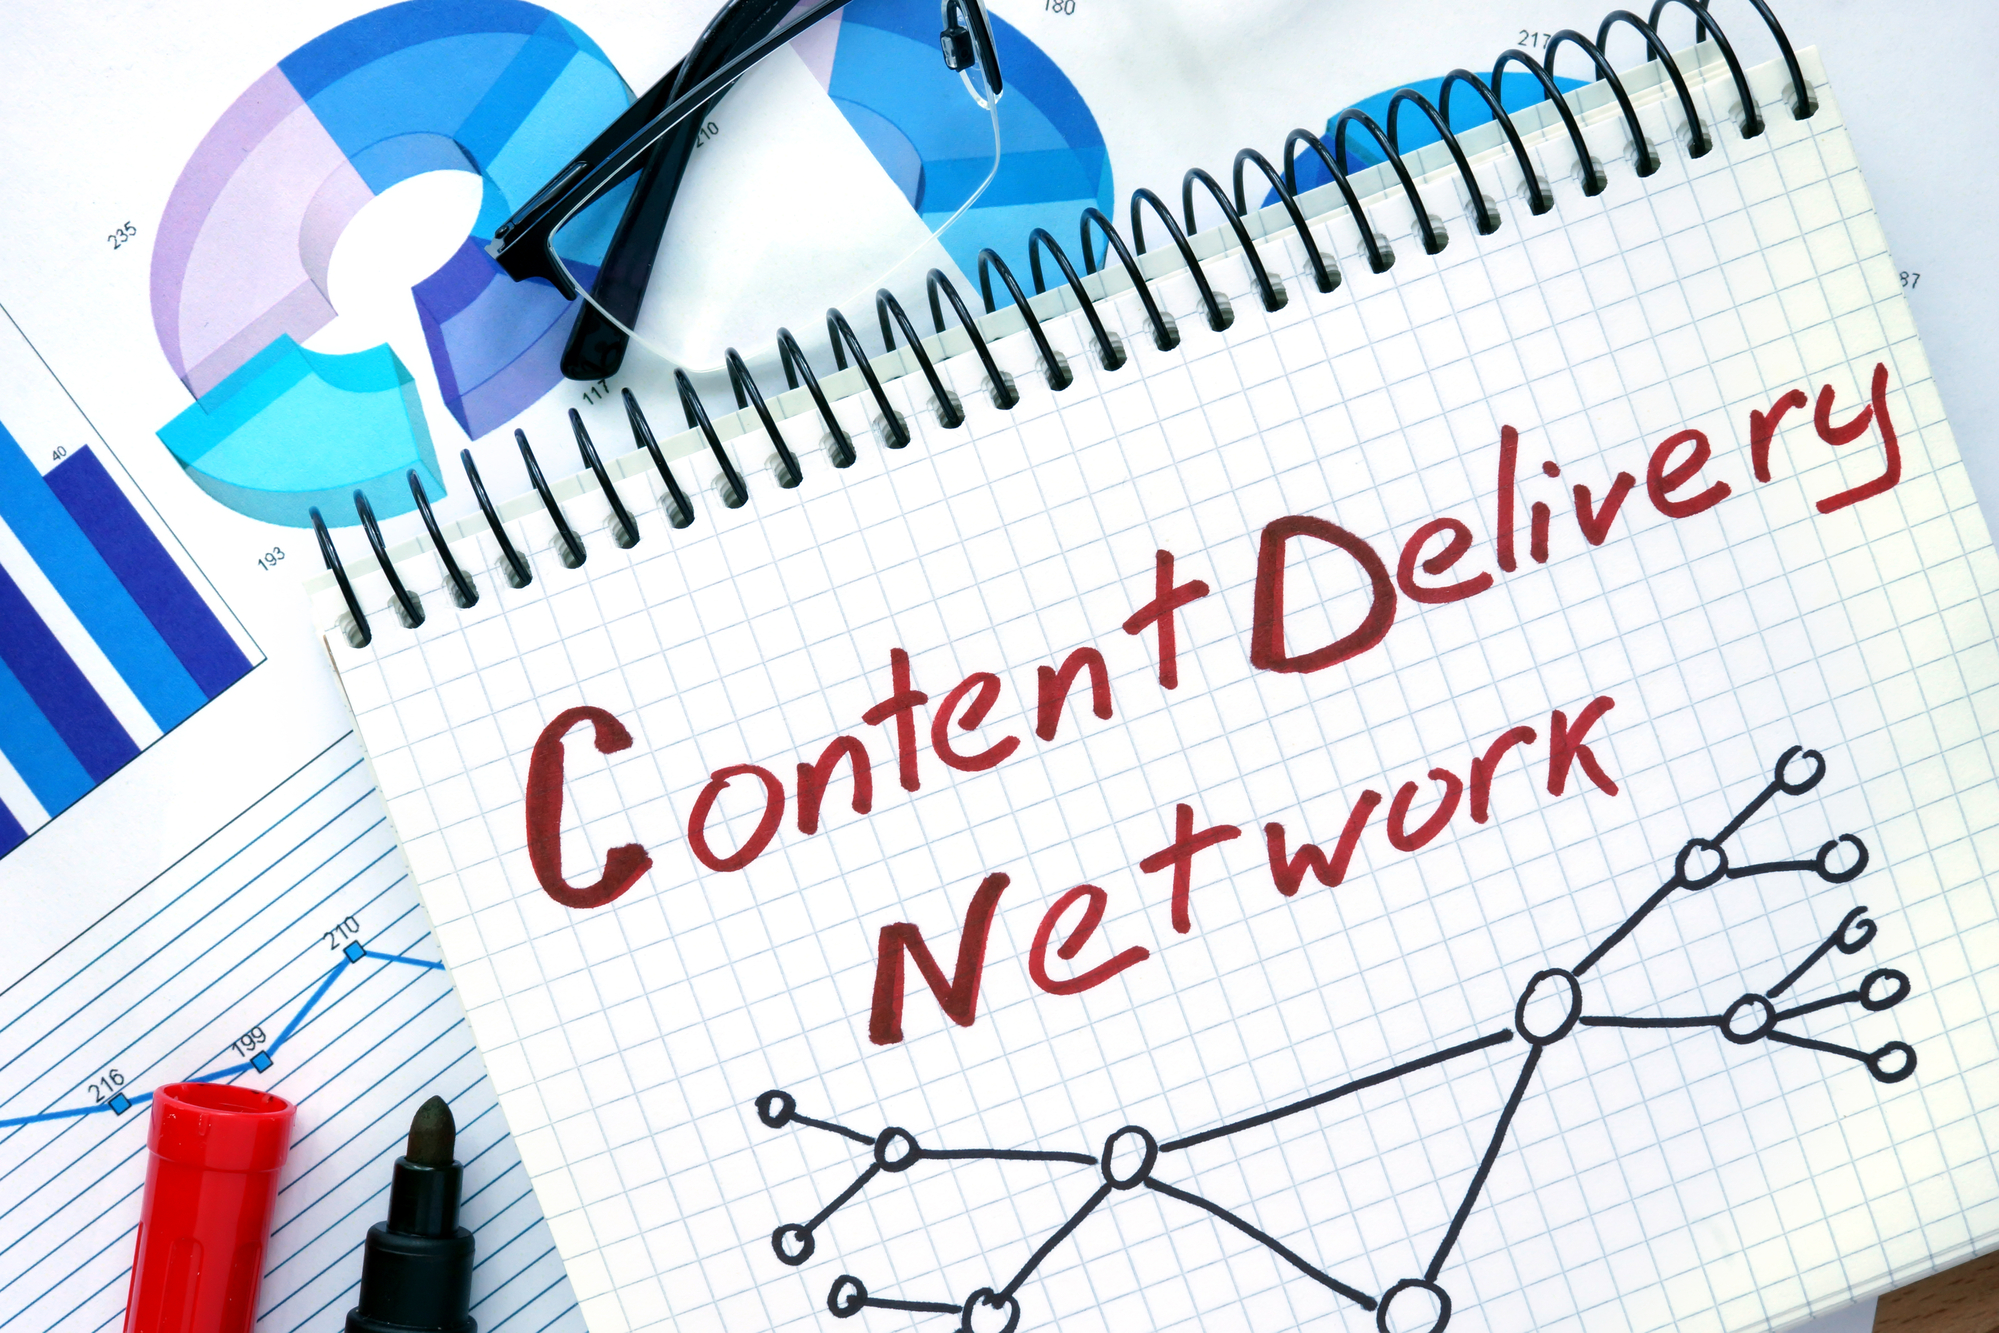 What are content delivery networks and why do you need one?